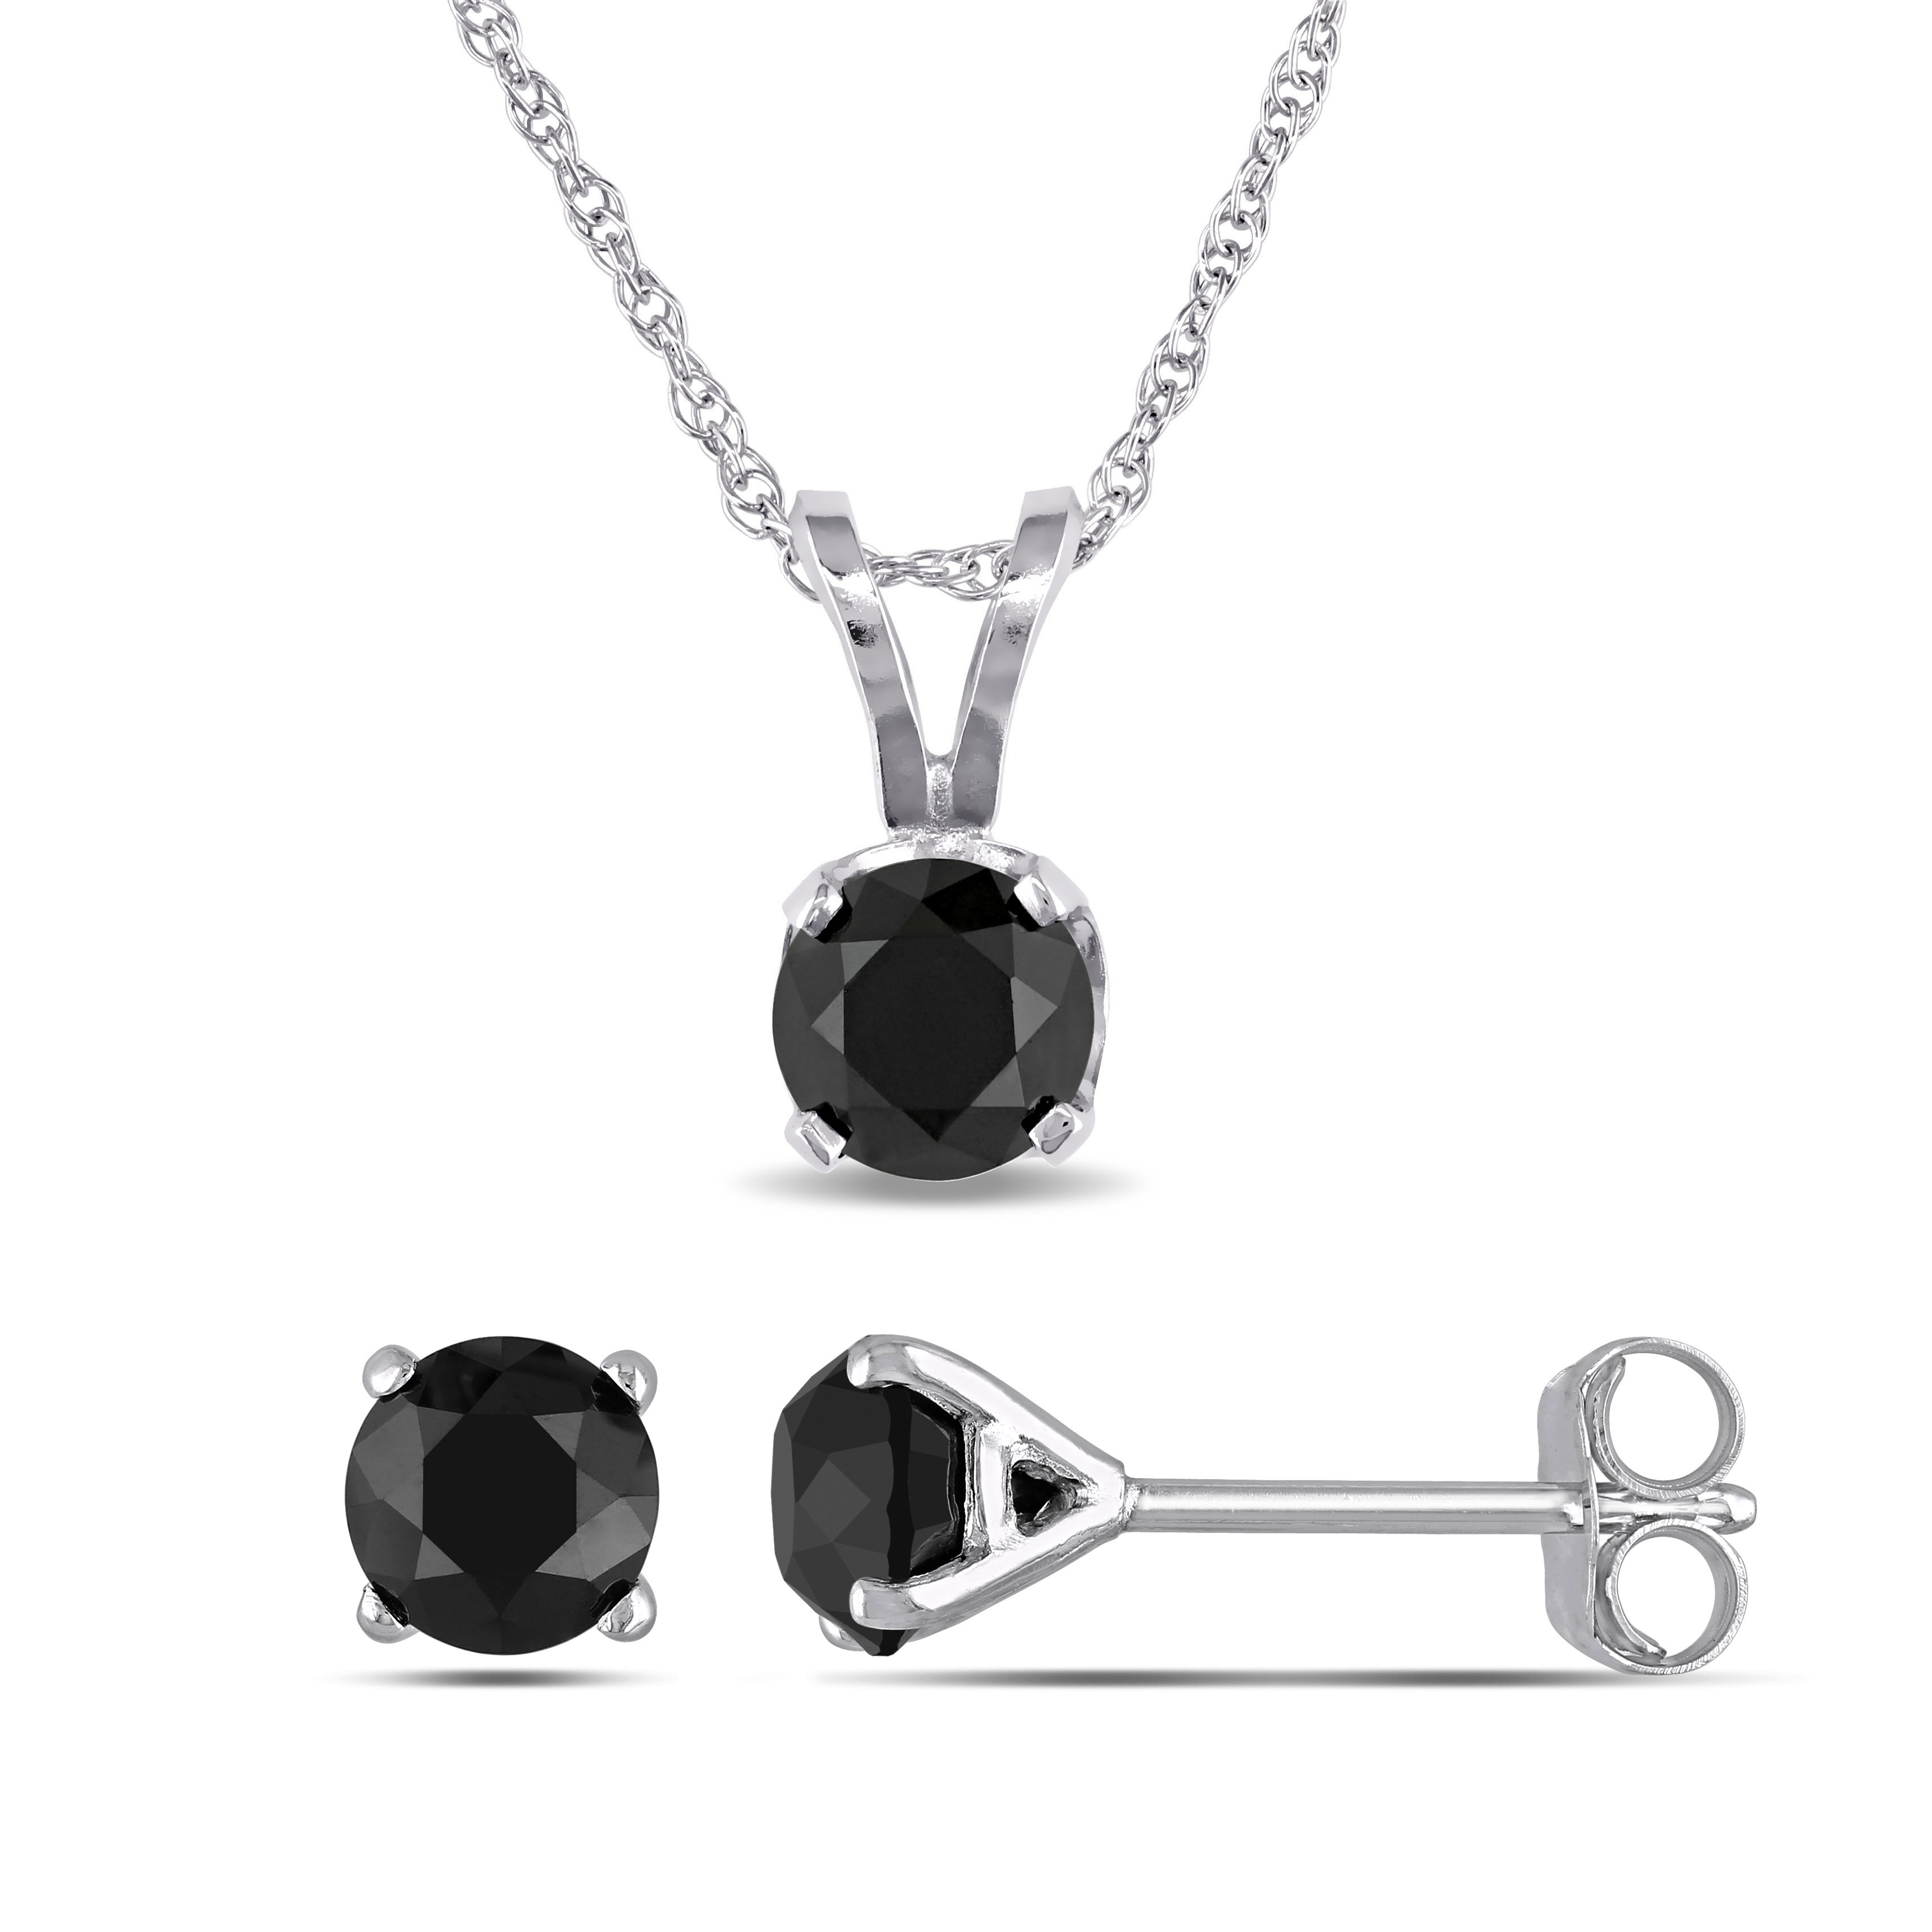 1 1/2 CT Black Diamond TW Fashion Post Earrings And Pendant With Chain in 10K White Gold